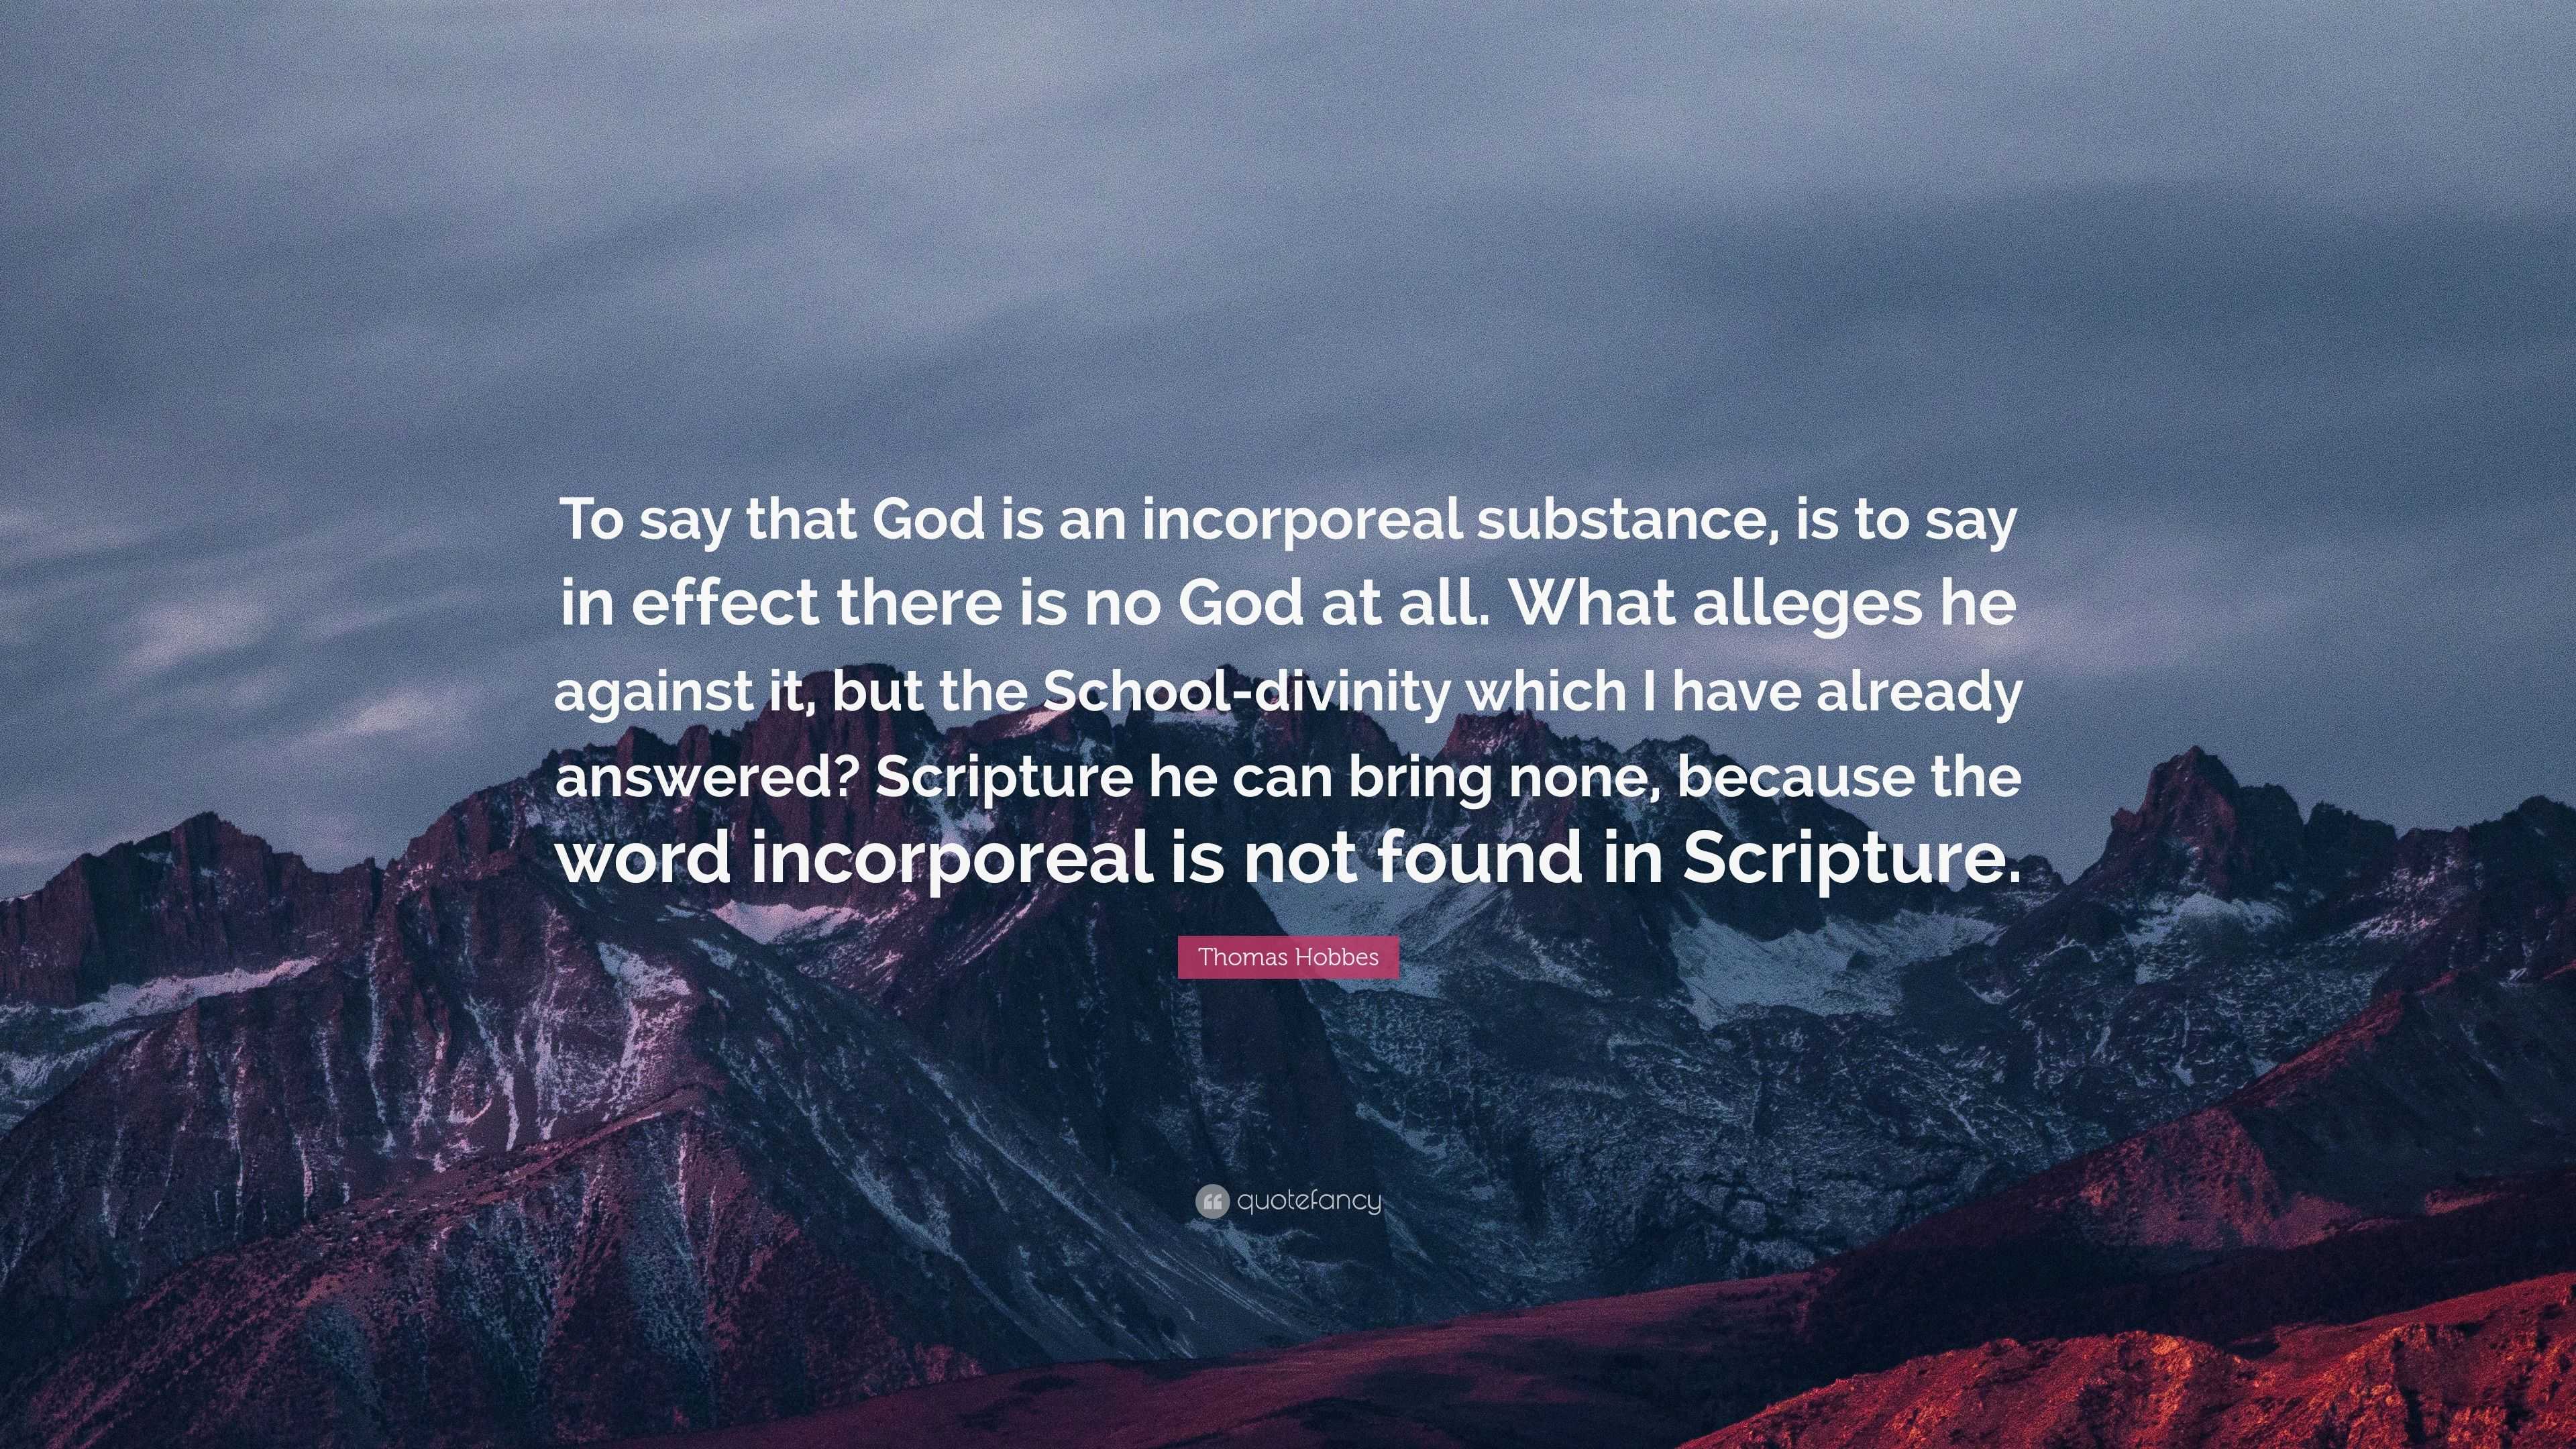 Thomas Hobbes Quote: “To say that God is an incorporeal substance, is ...